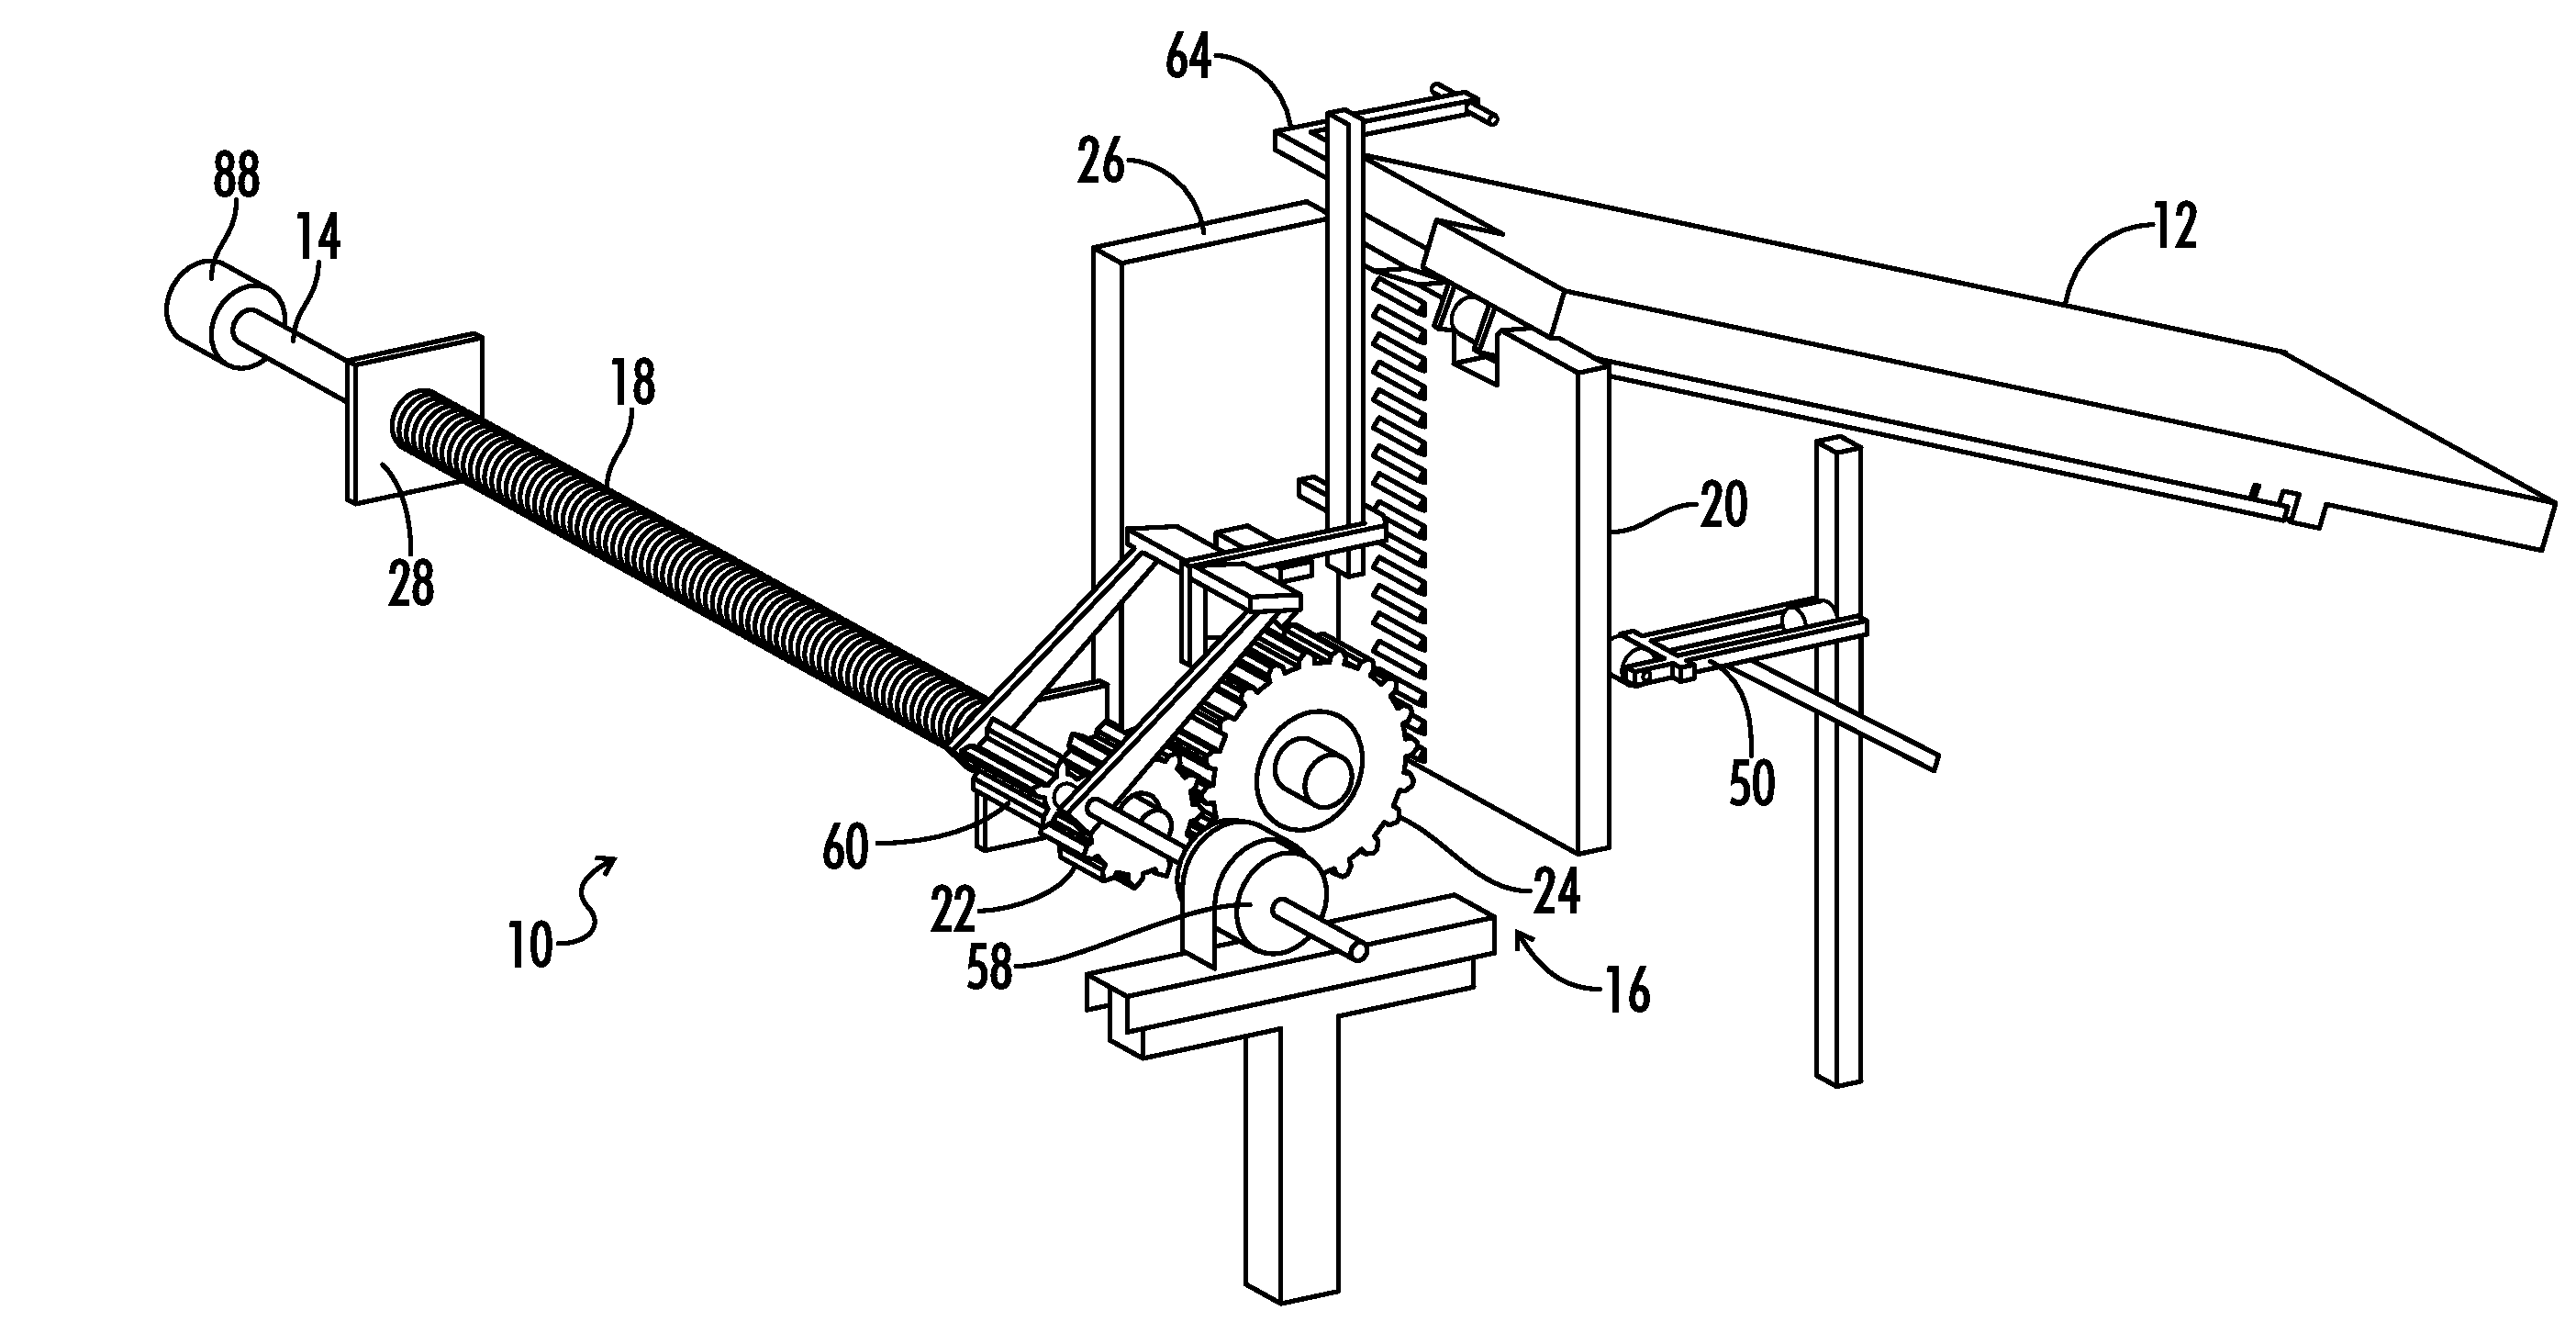 Static Weight Energy Production Apparatus